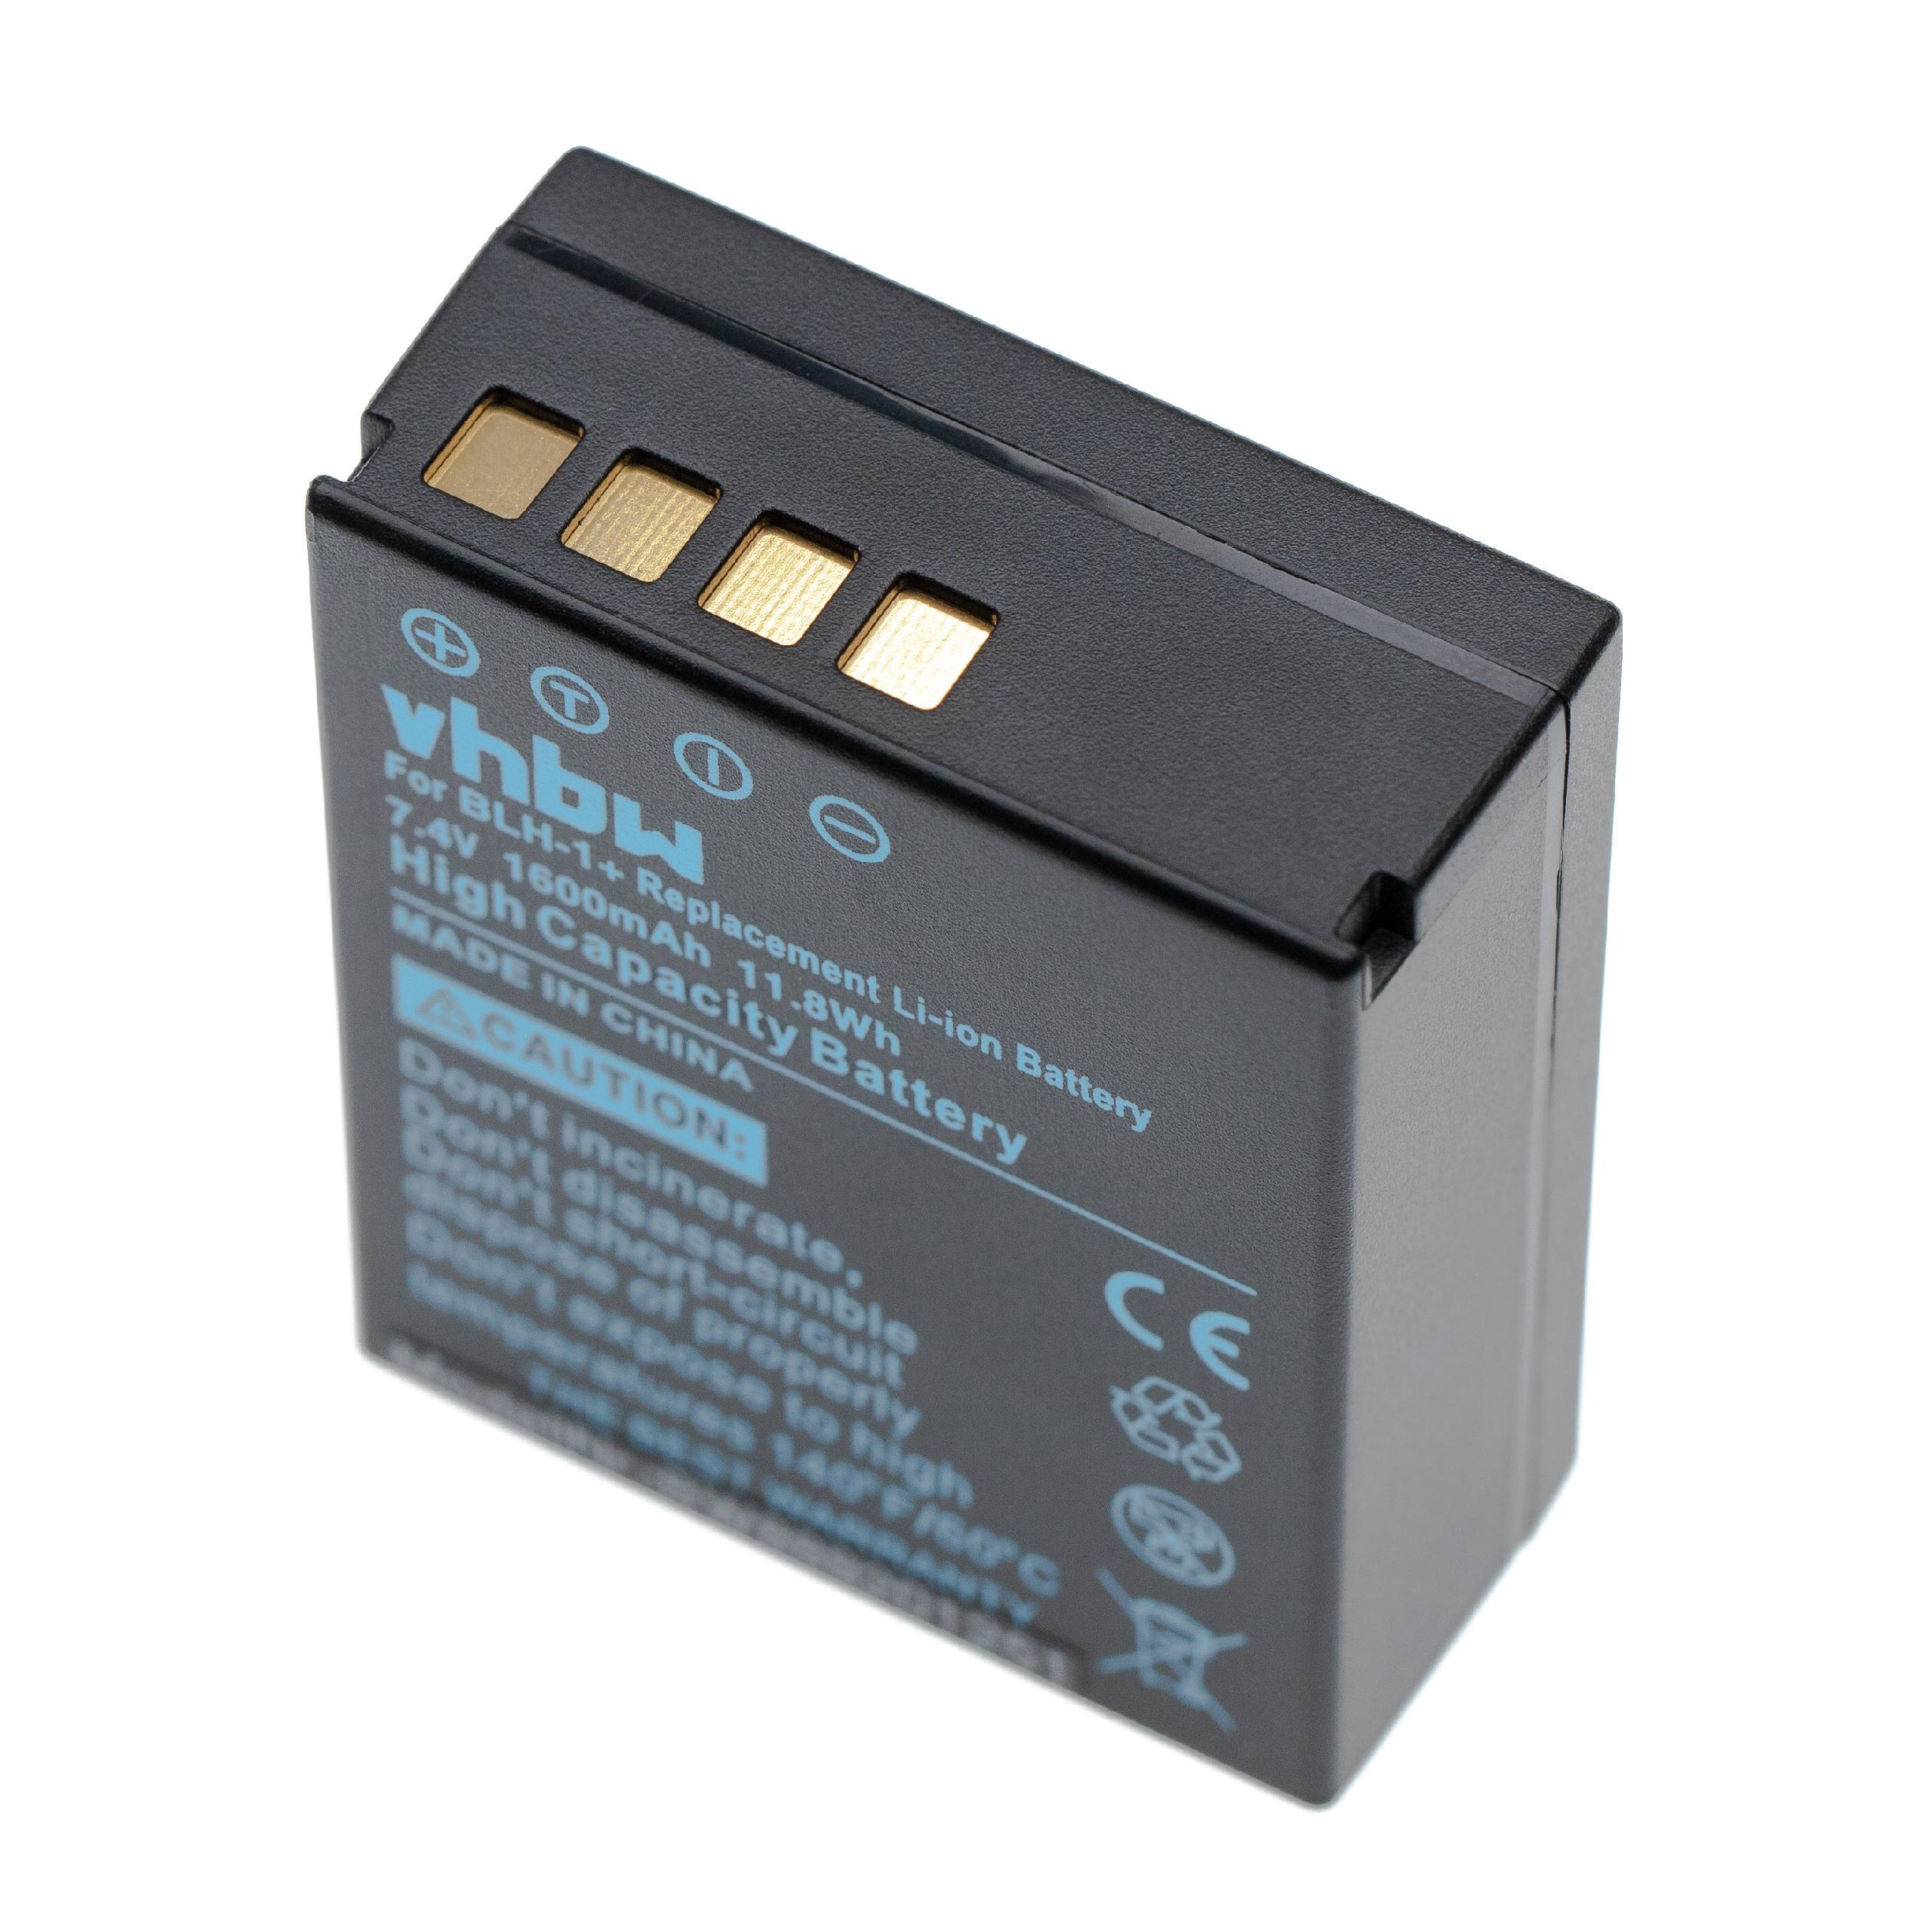 Battery Replacement for Olympus BLH-1 - 1600mAh, 7.4V, Li-Ion with Info Chip